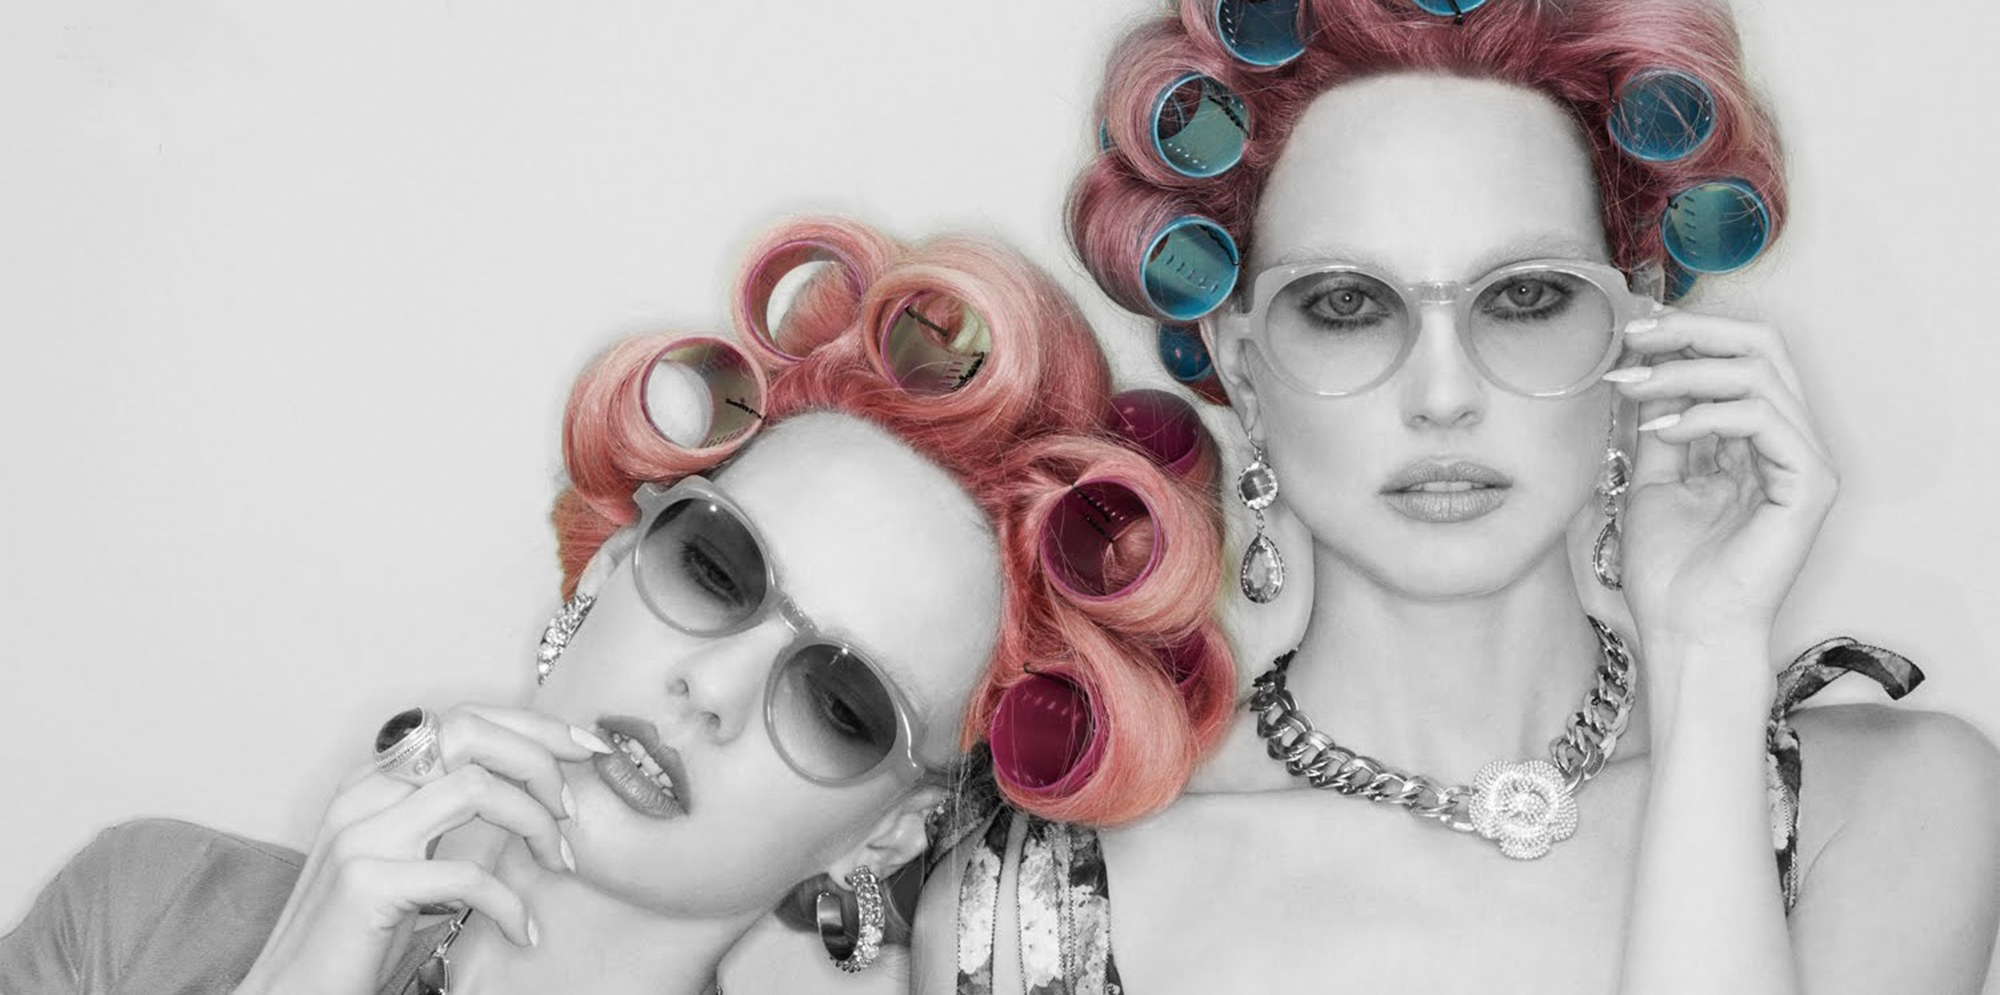 this is a fashion photography about two women perm their hair.